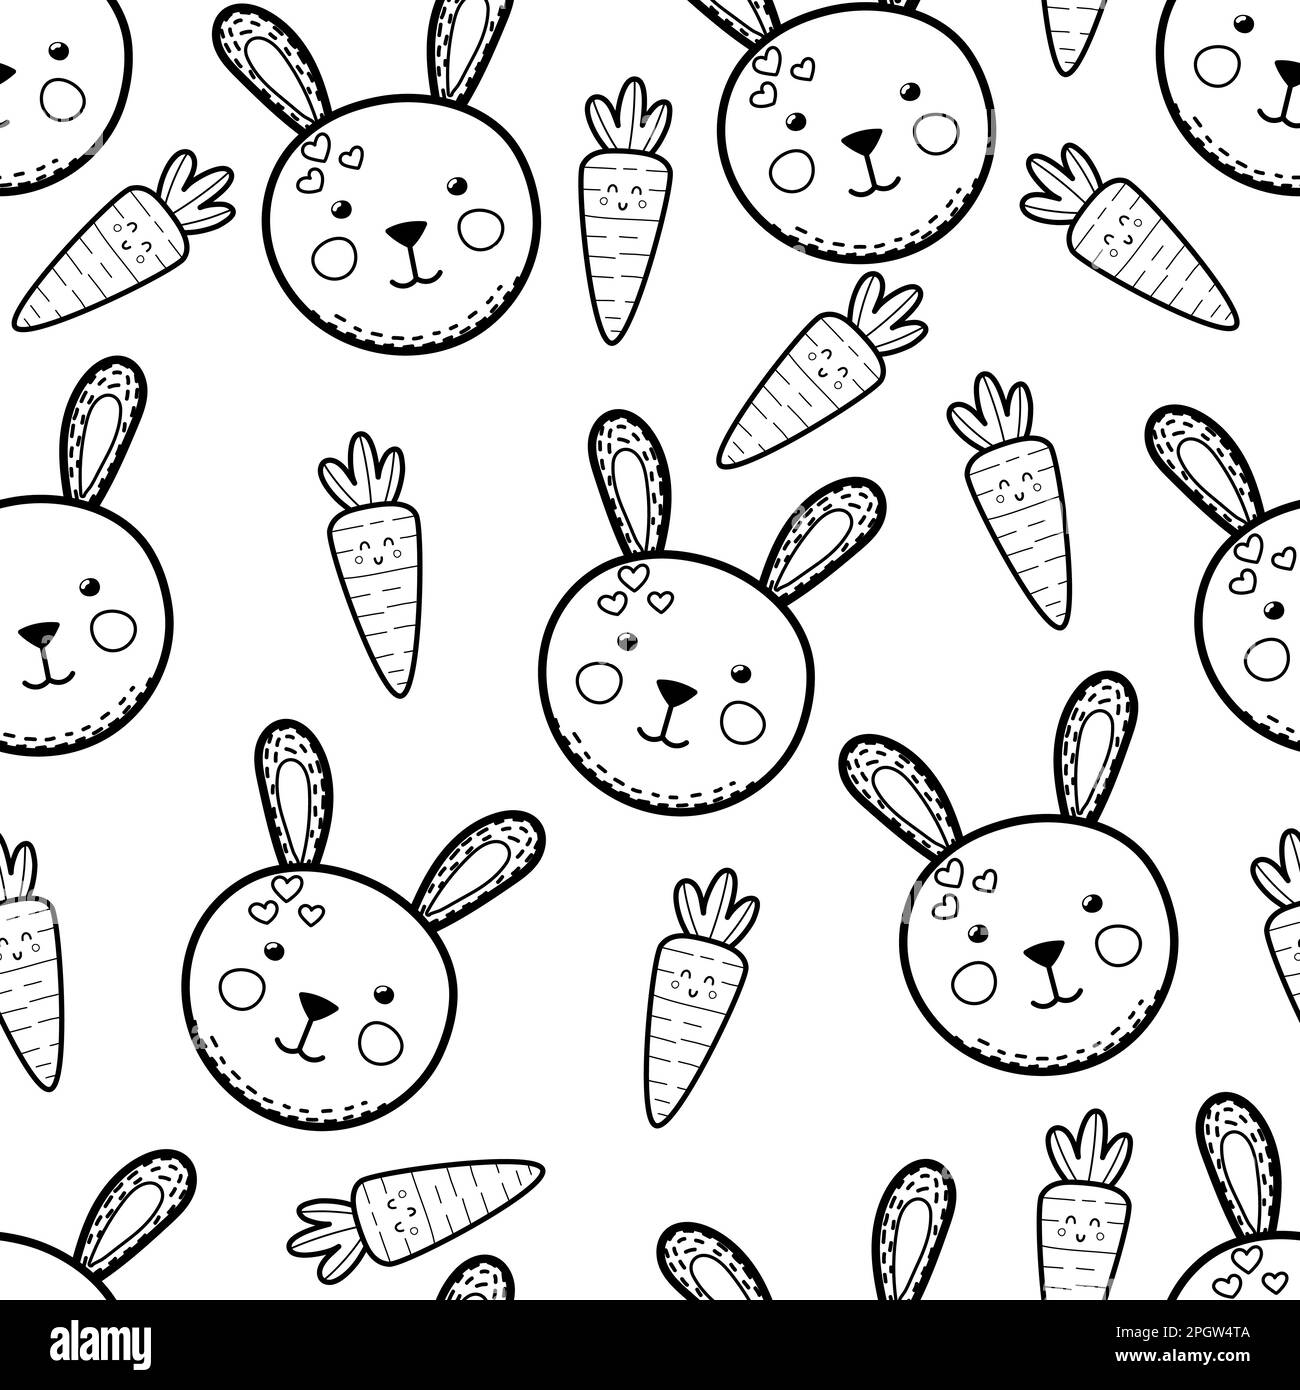 Cute rabbit and carrots black and white seamless pattern. Springtime background Stock Vector